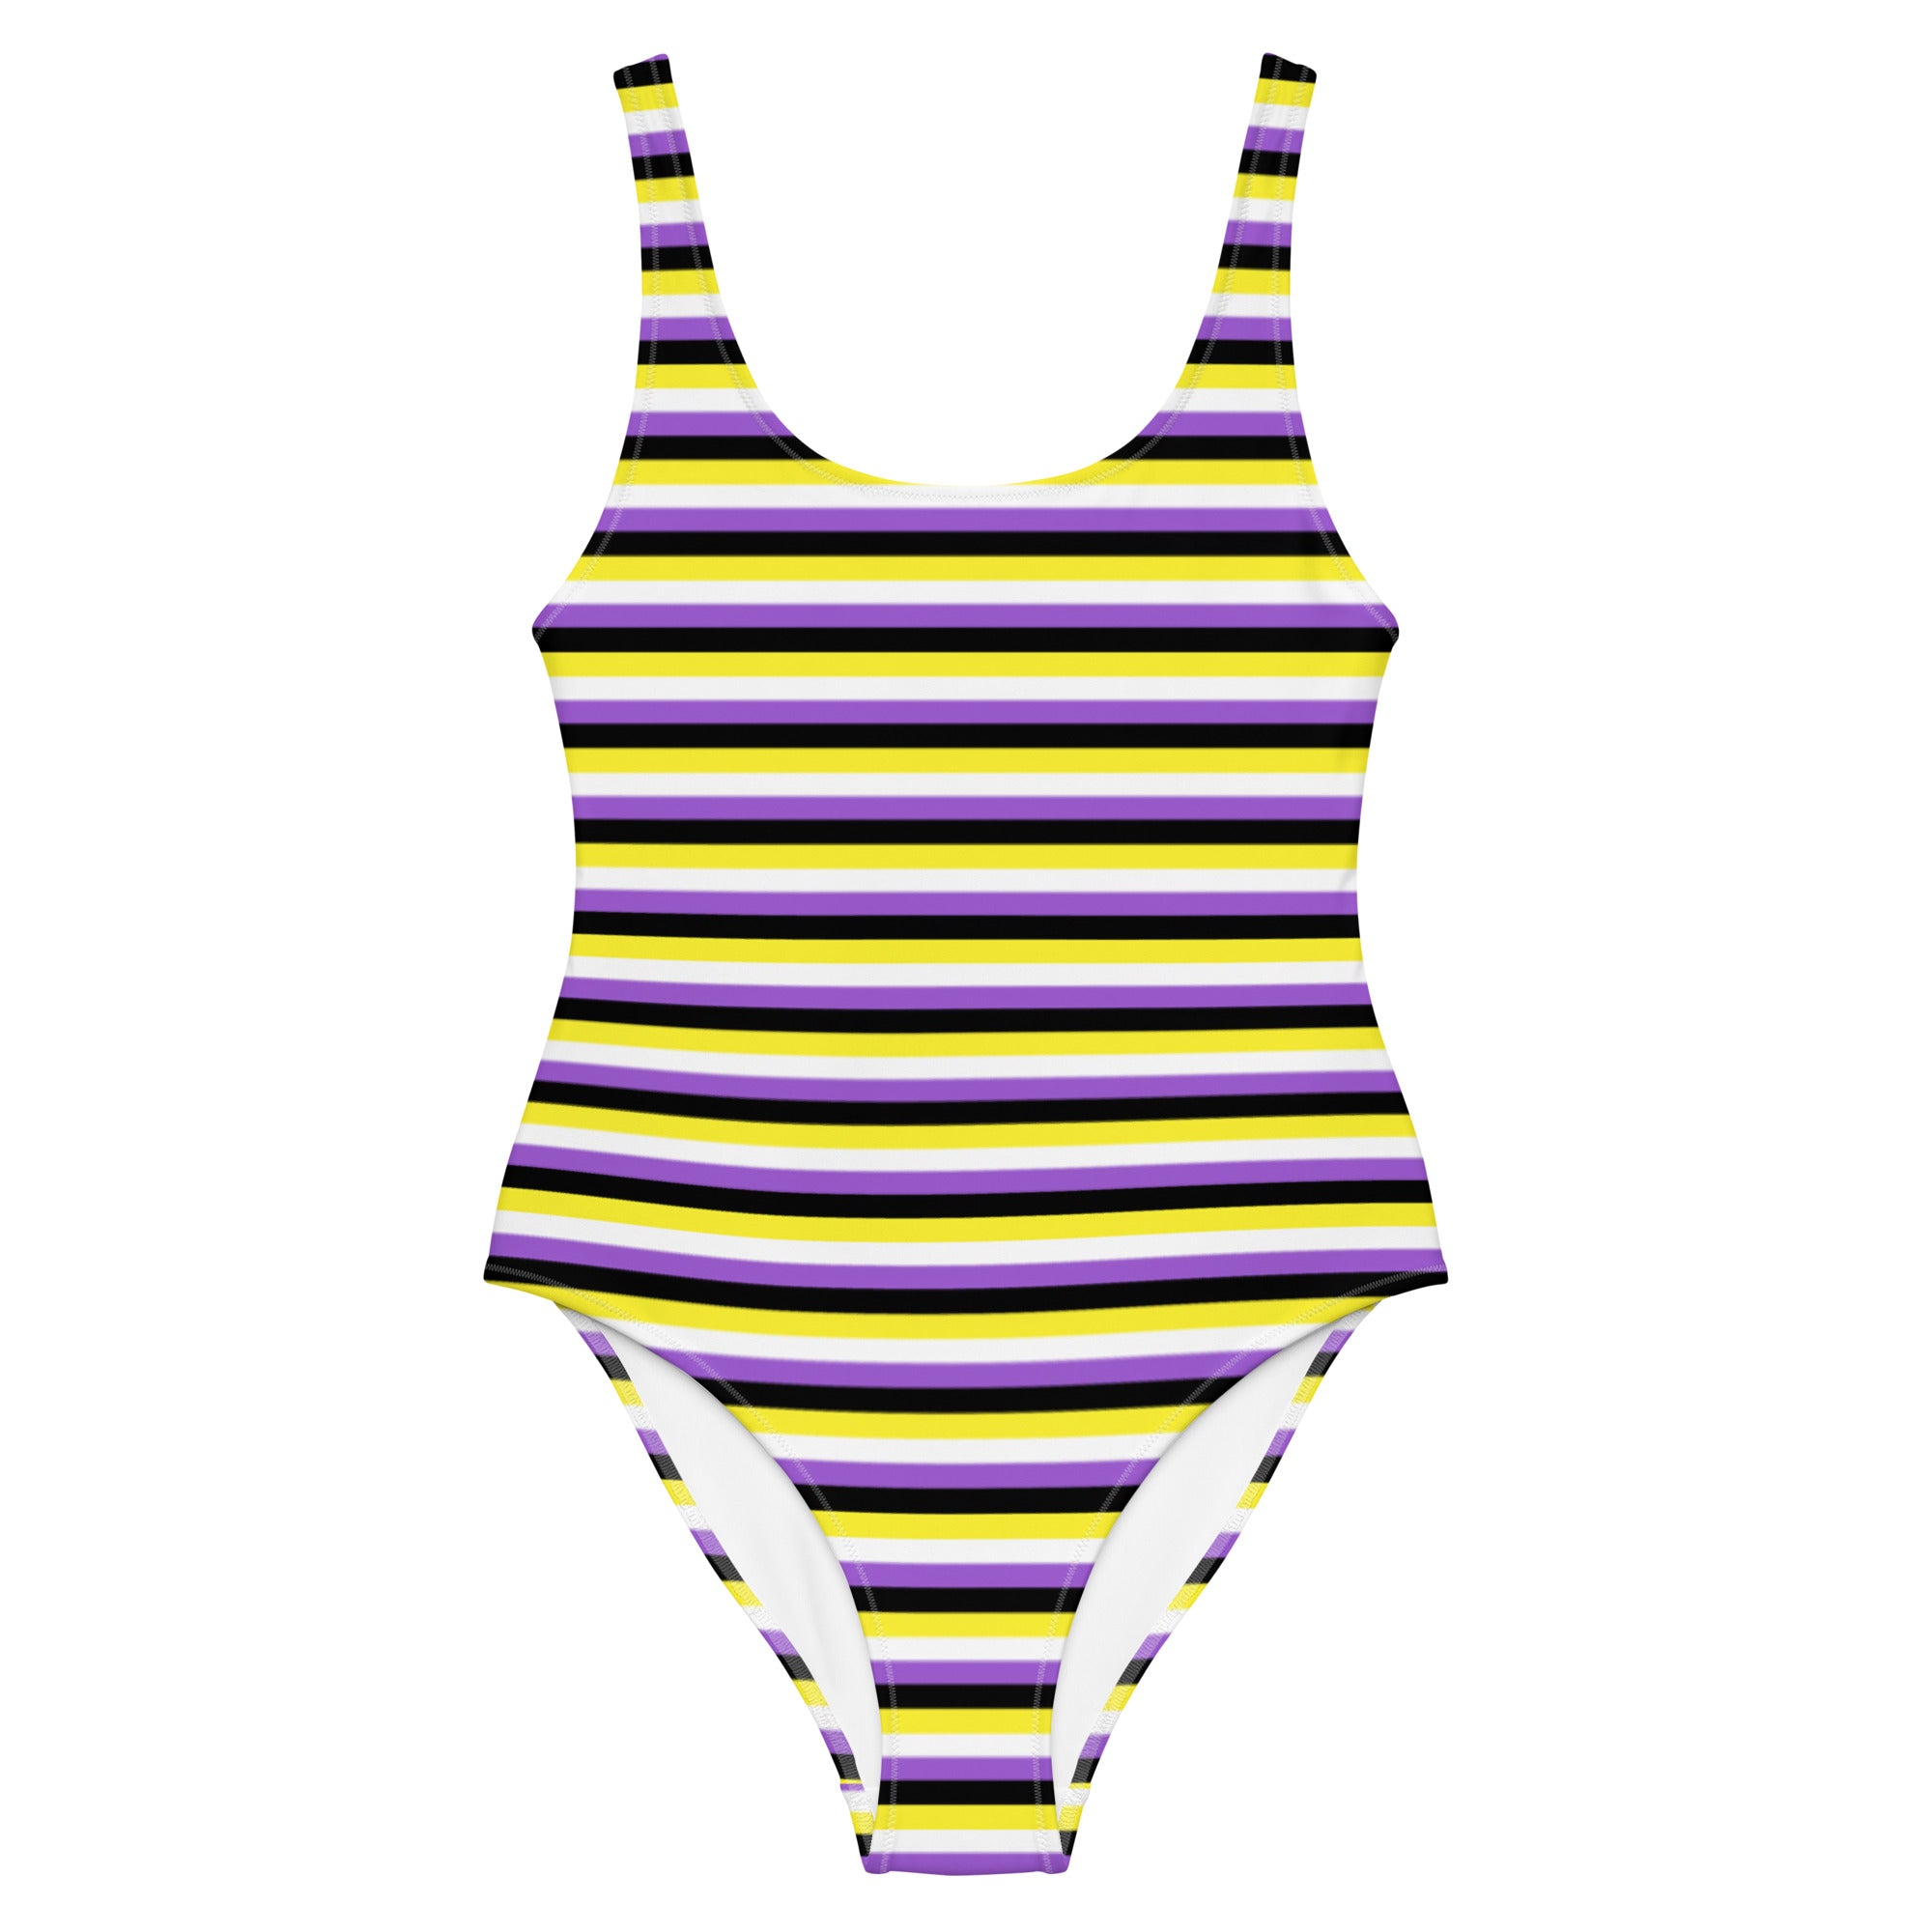 Non-Binary Flag One-Piece Swimsuit